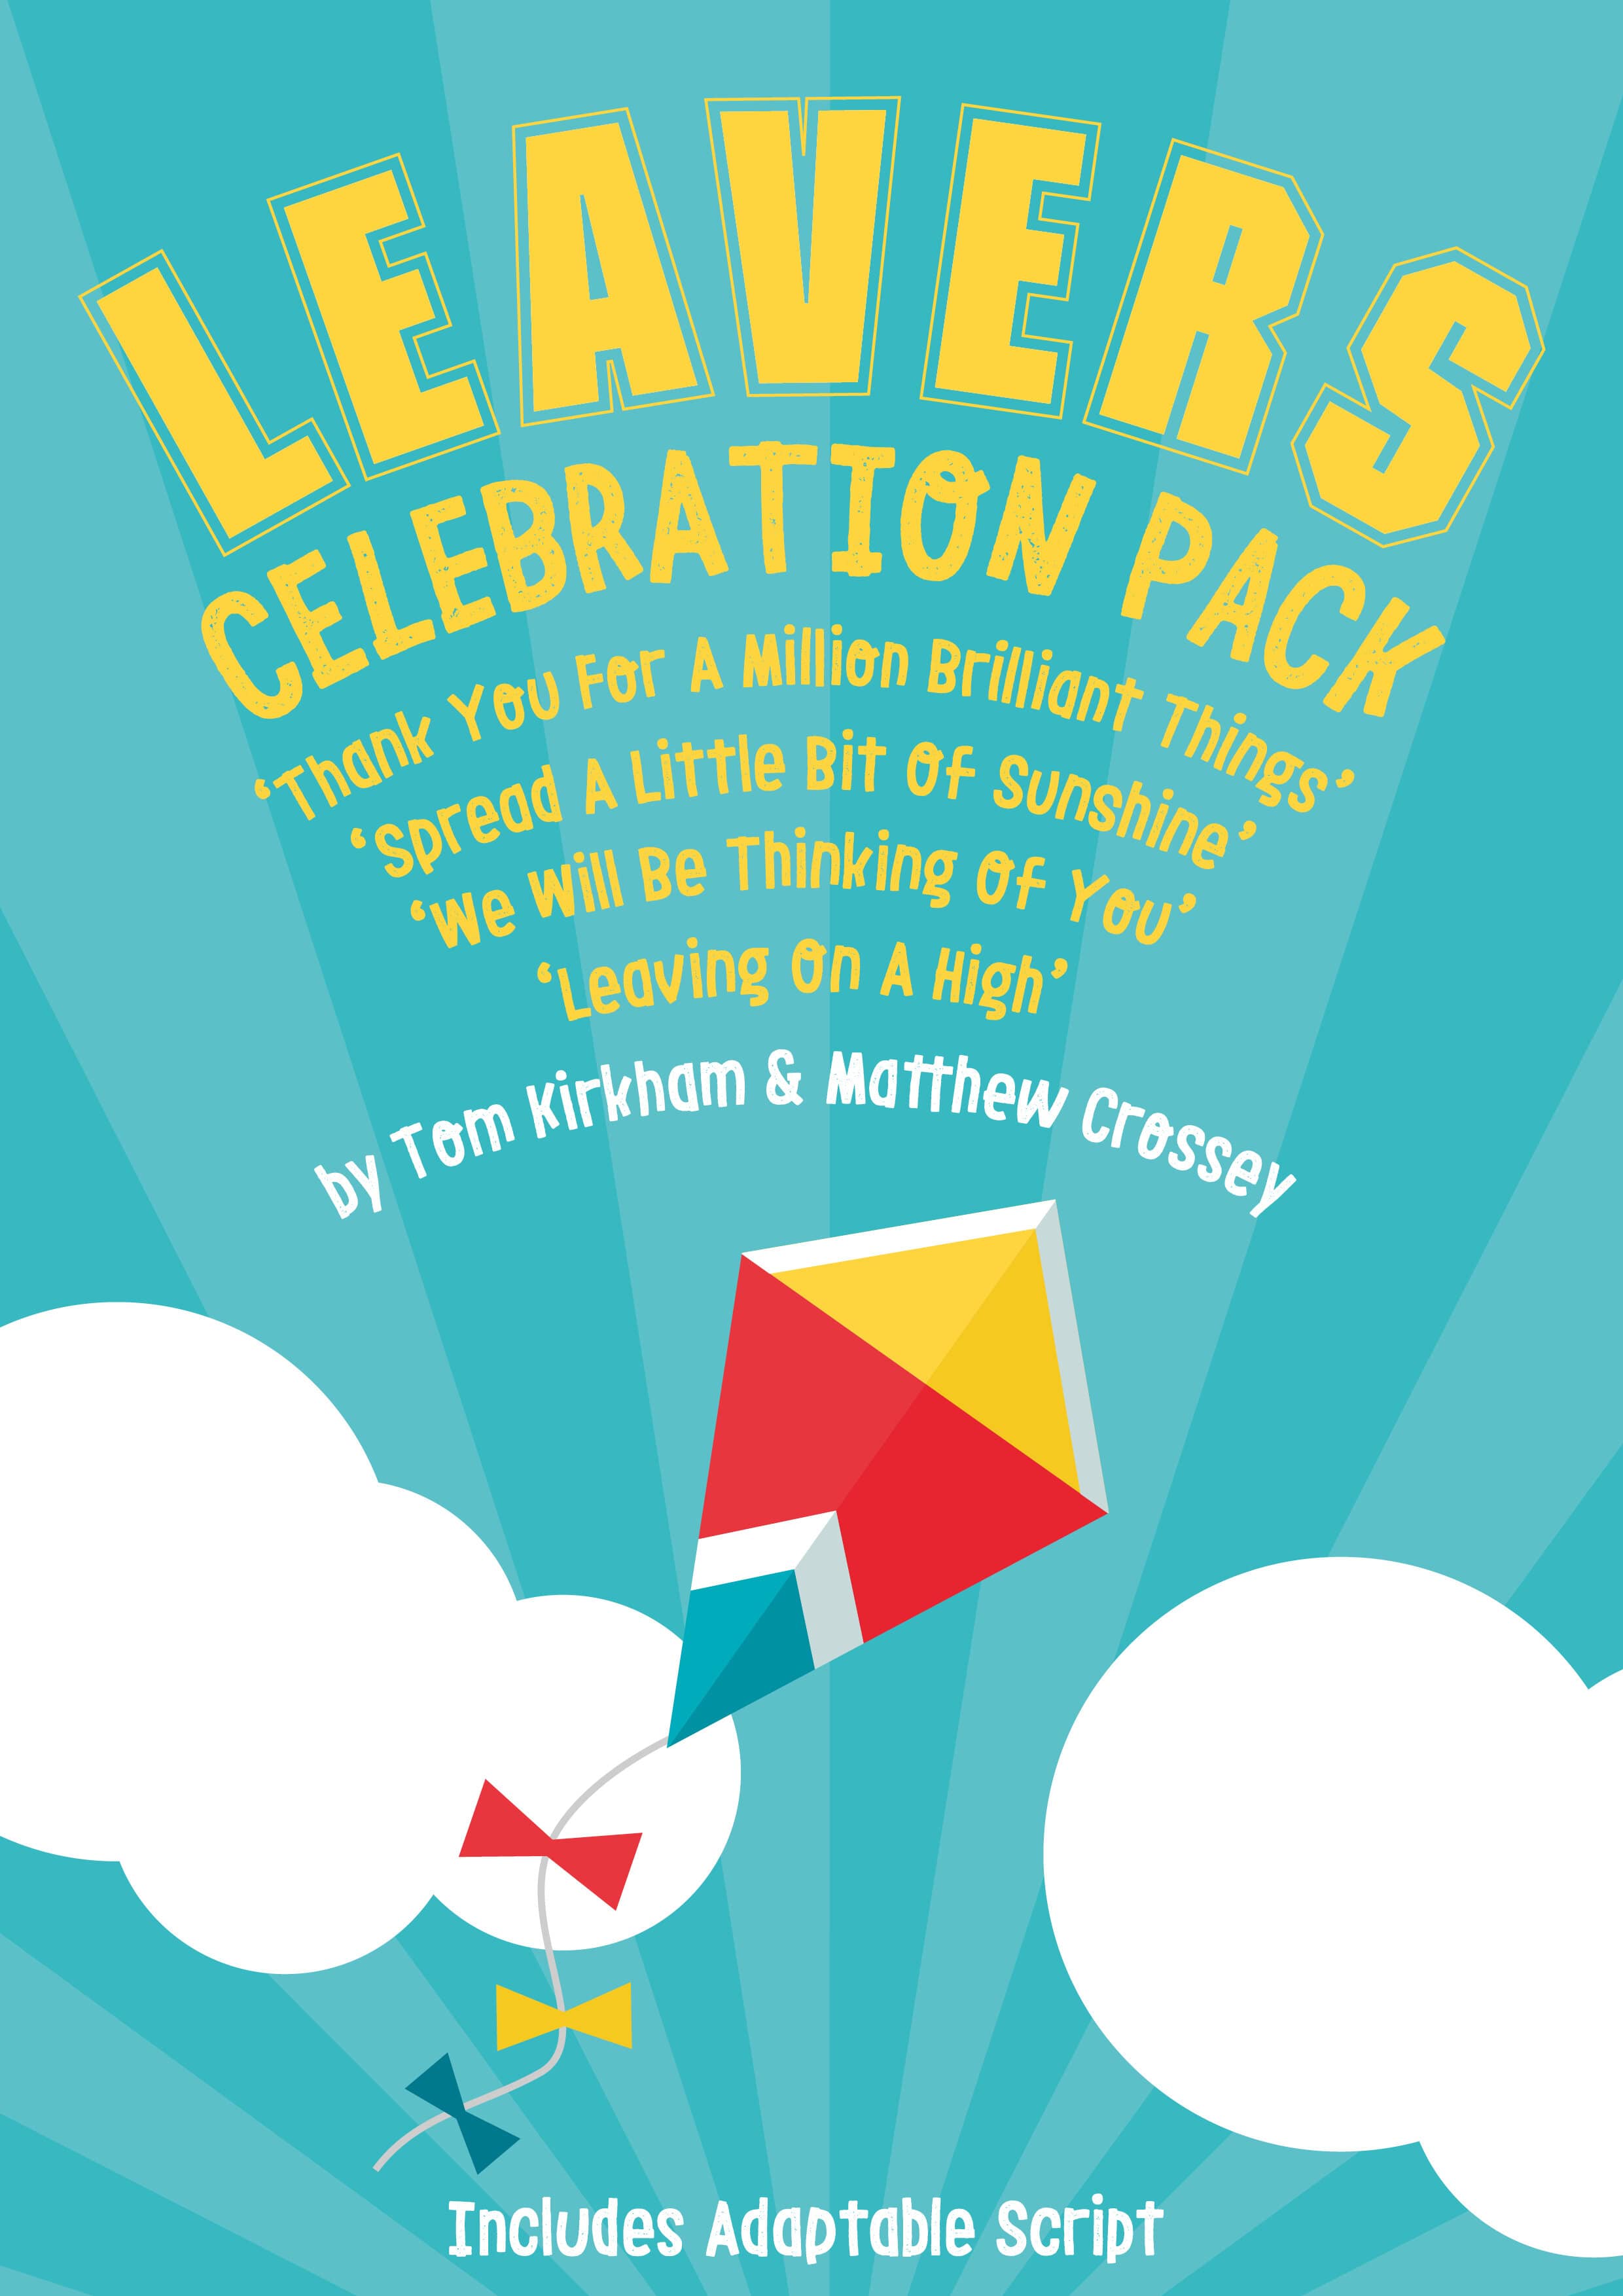 Leavers Celebration Assembly Download Pack - 100% discount with code CELEBRATION100